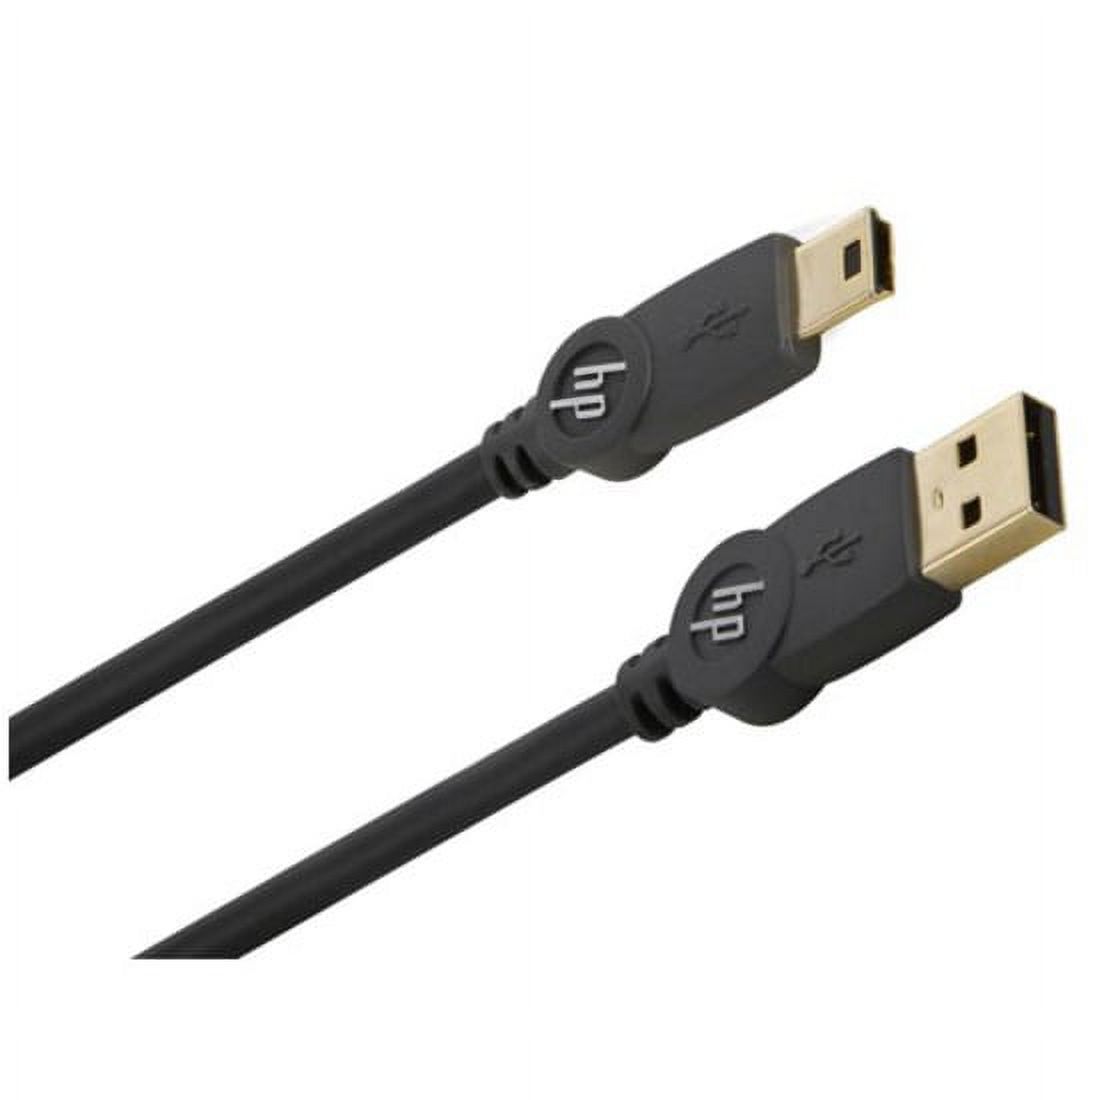 Monster Cable HPM 700 USBM-3 Mini USB Cable - image 1 of 5